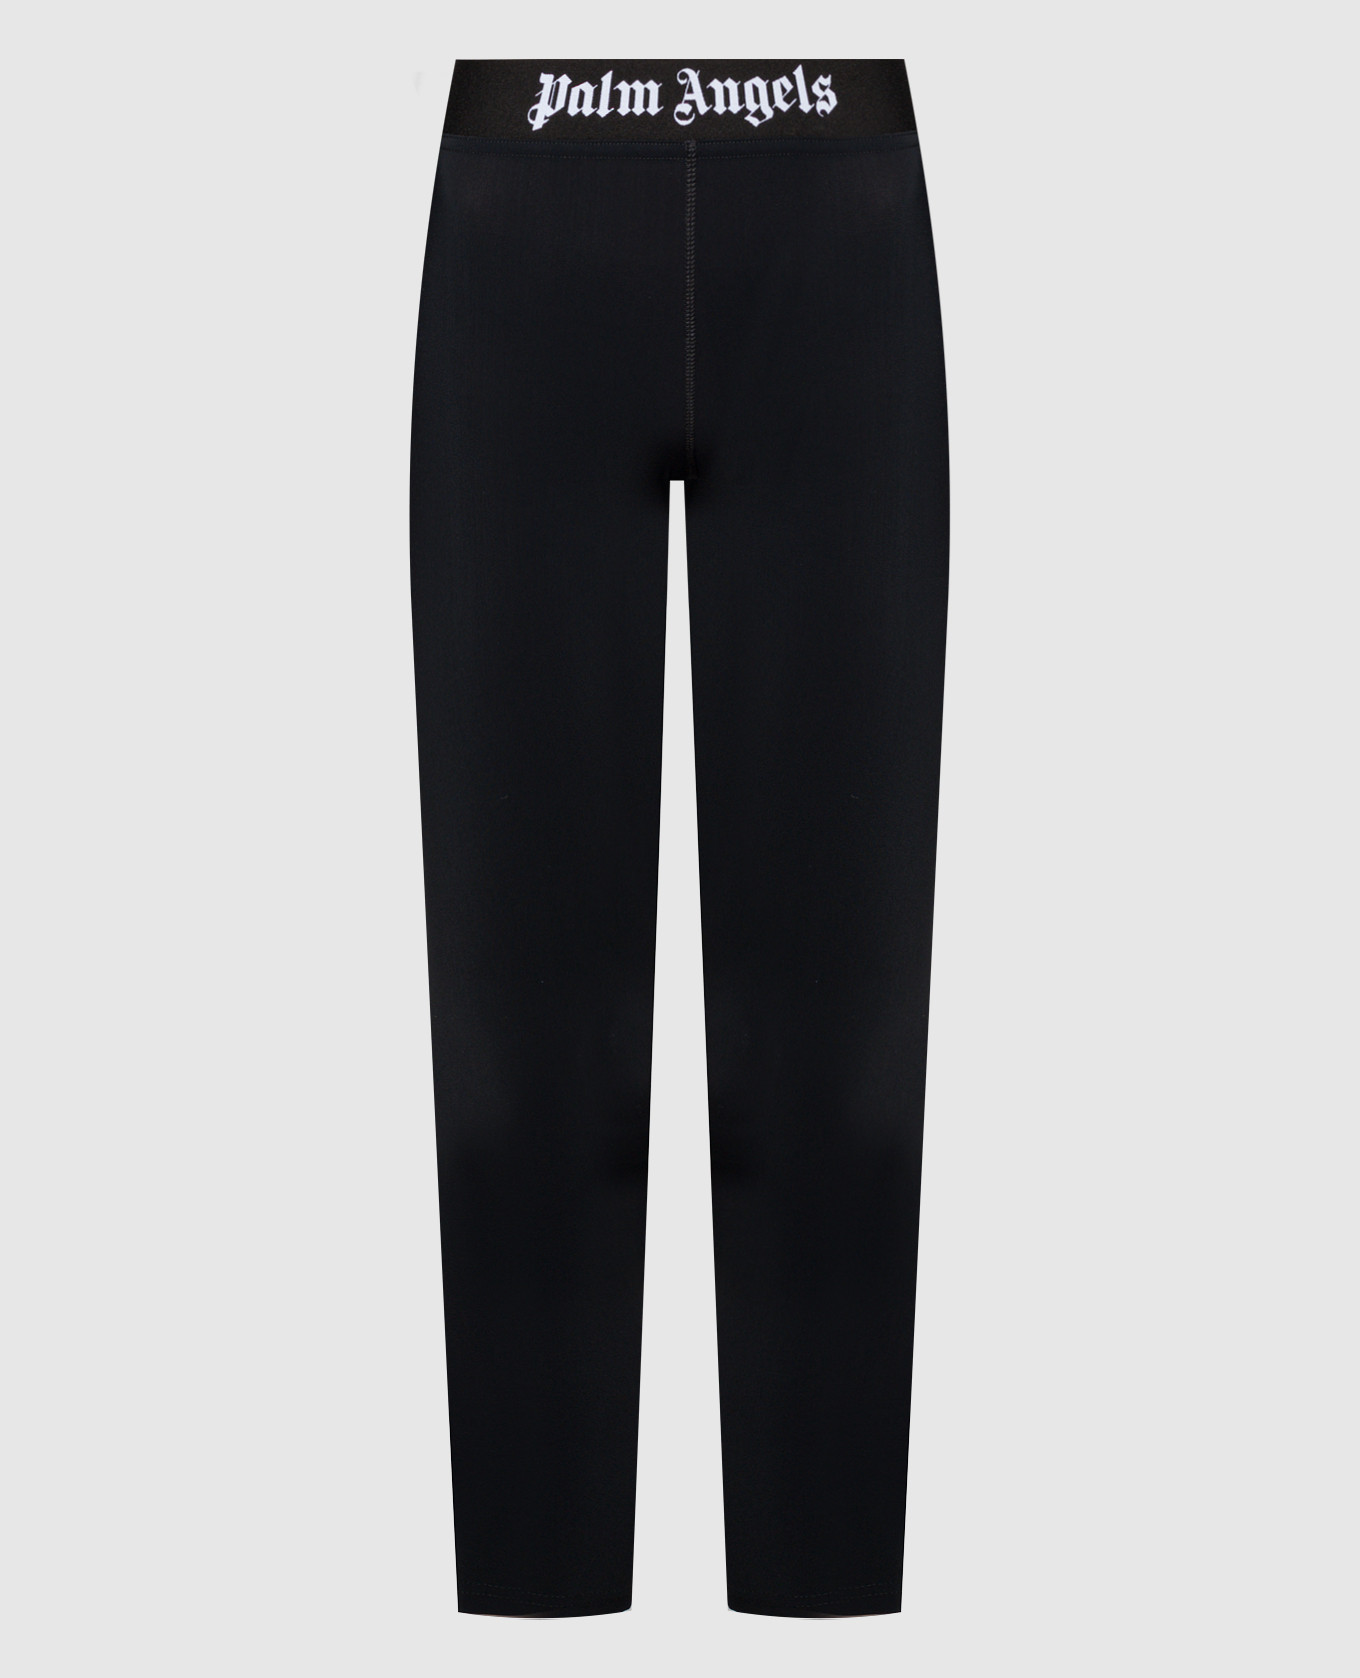 Palm Angels - Black leggings with a contrasting logo pattern